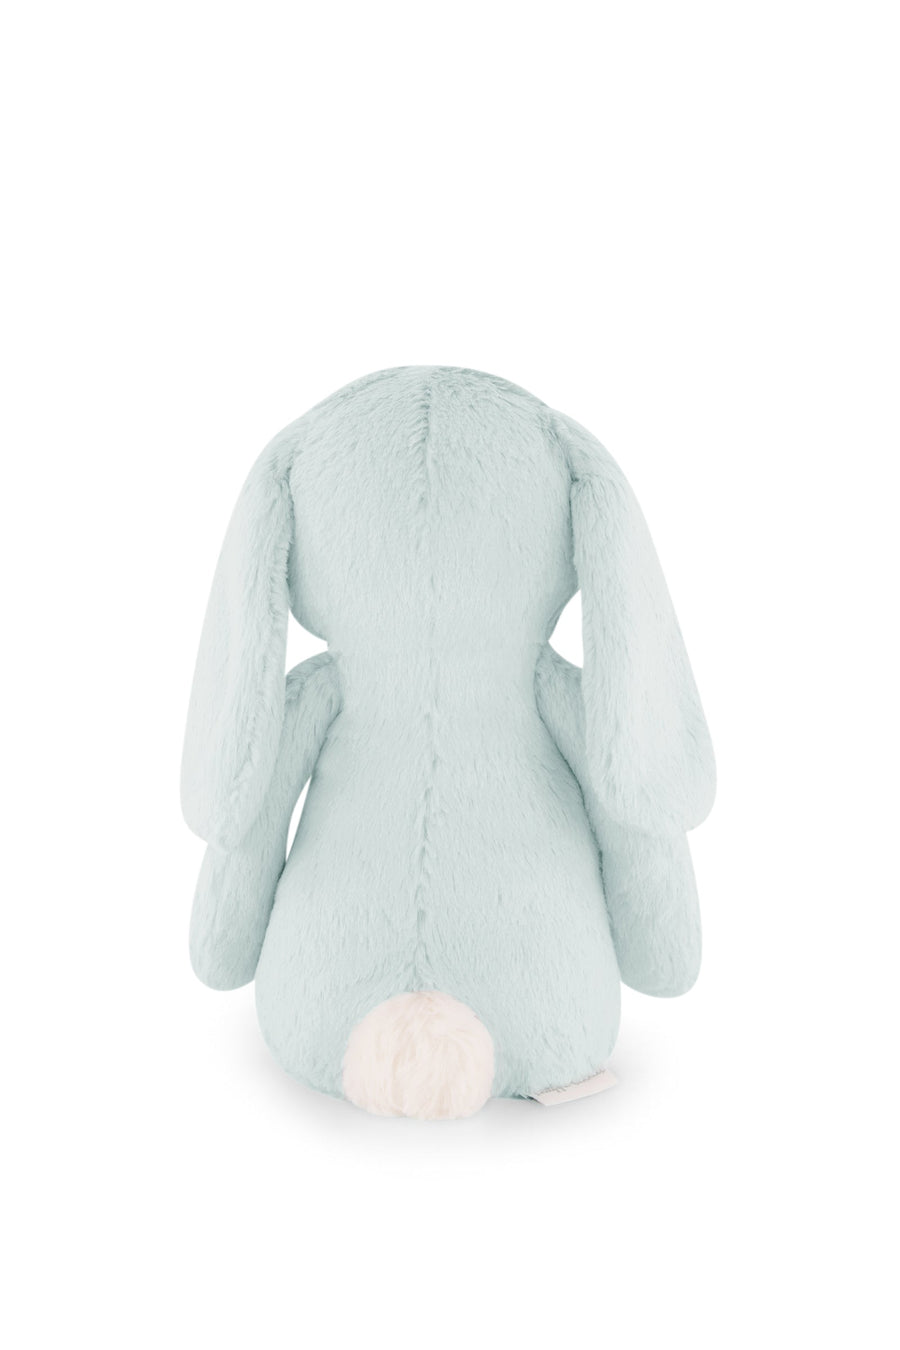 Snuggle Bunnies - Penelope the Bunny - Sky Childrens Toy from Jamie Kay NZ